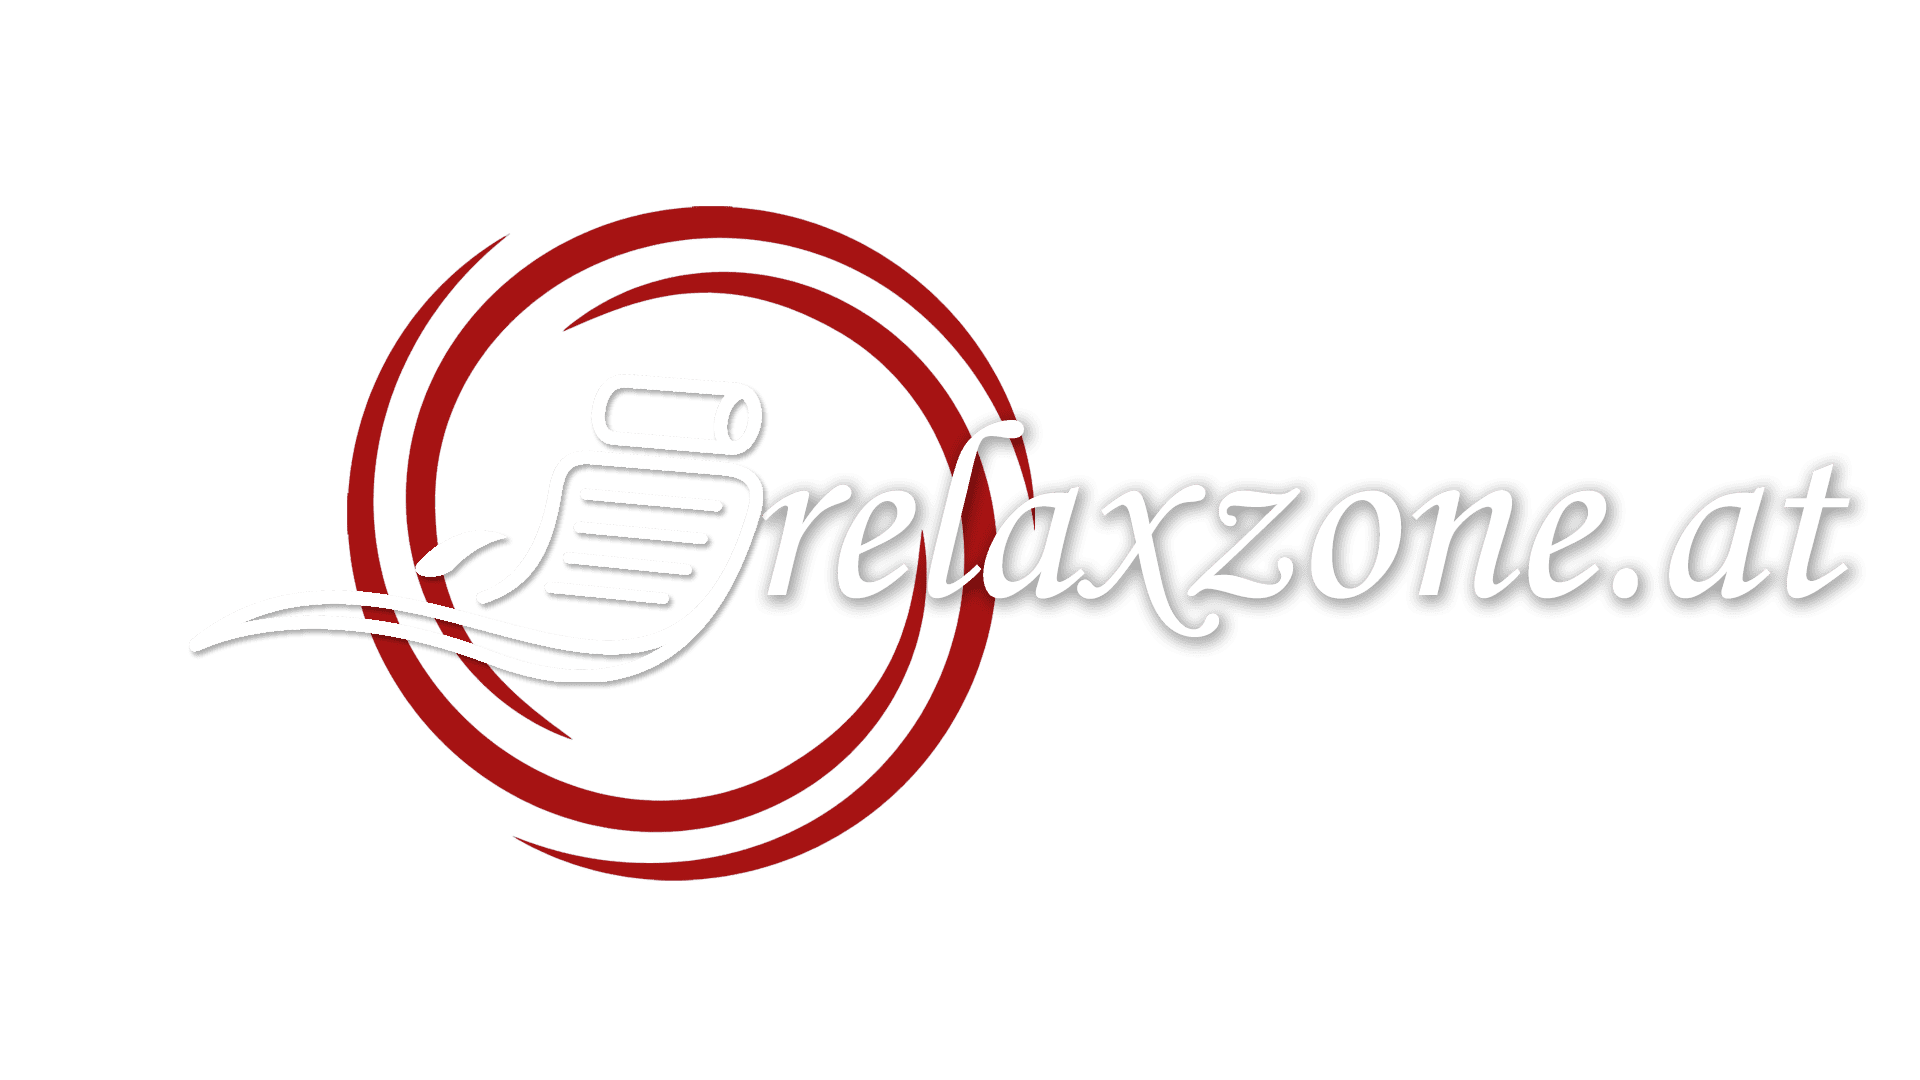 Relaxzone.at